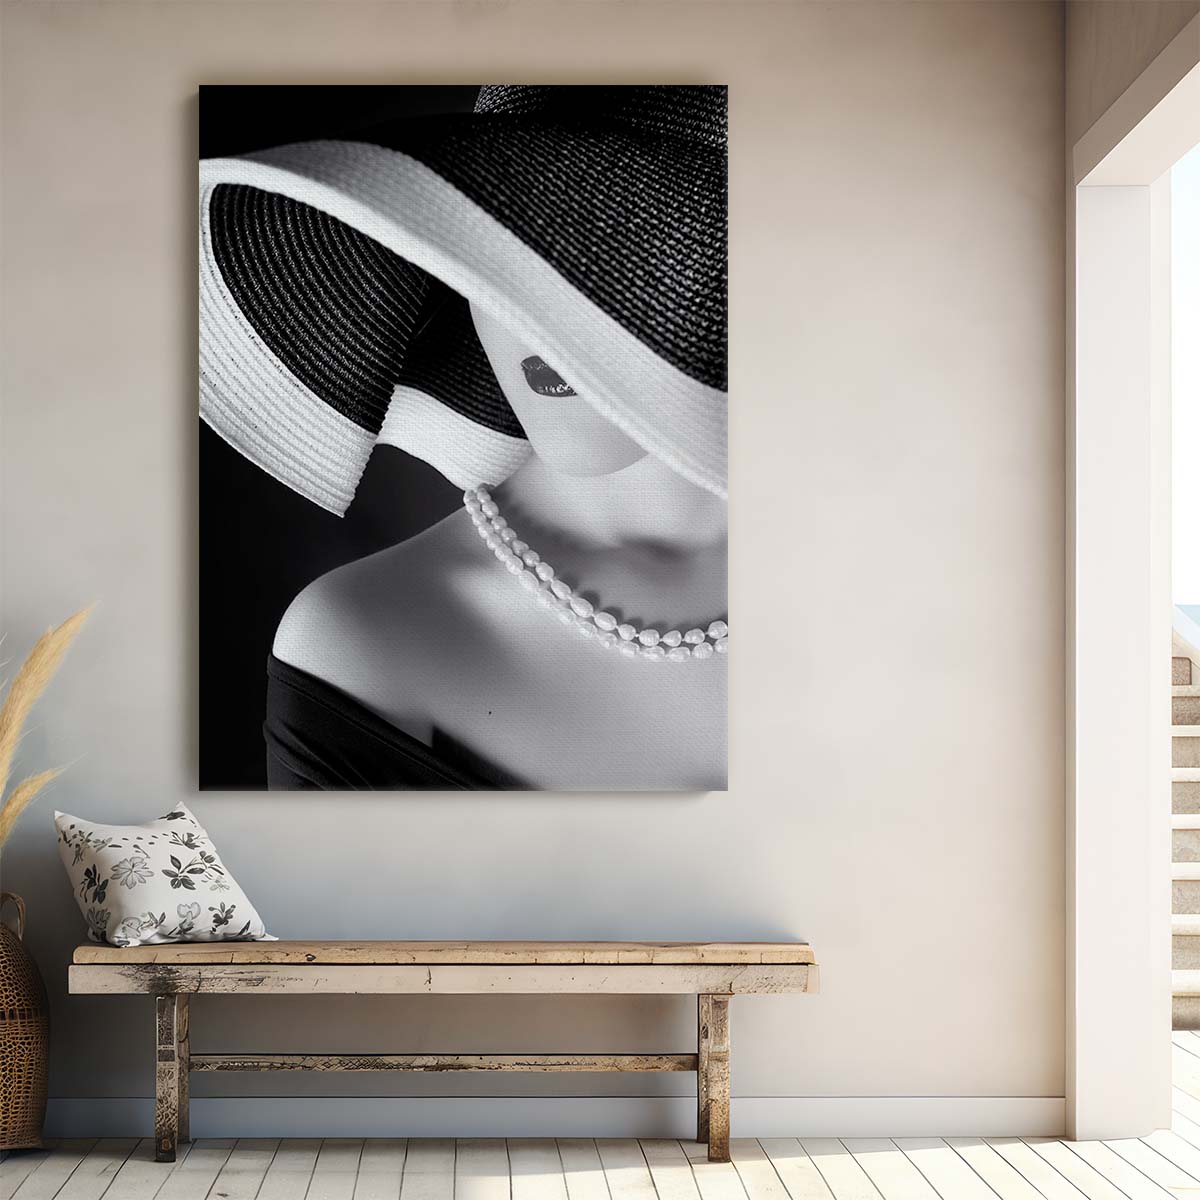 Sensual Monochrome Fashion Portrait of Woman with Pearls & Hat Photography by Luxuriance Designs, made in USA